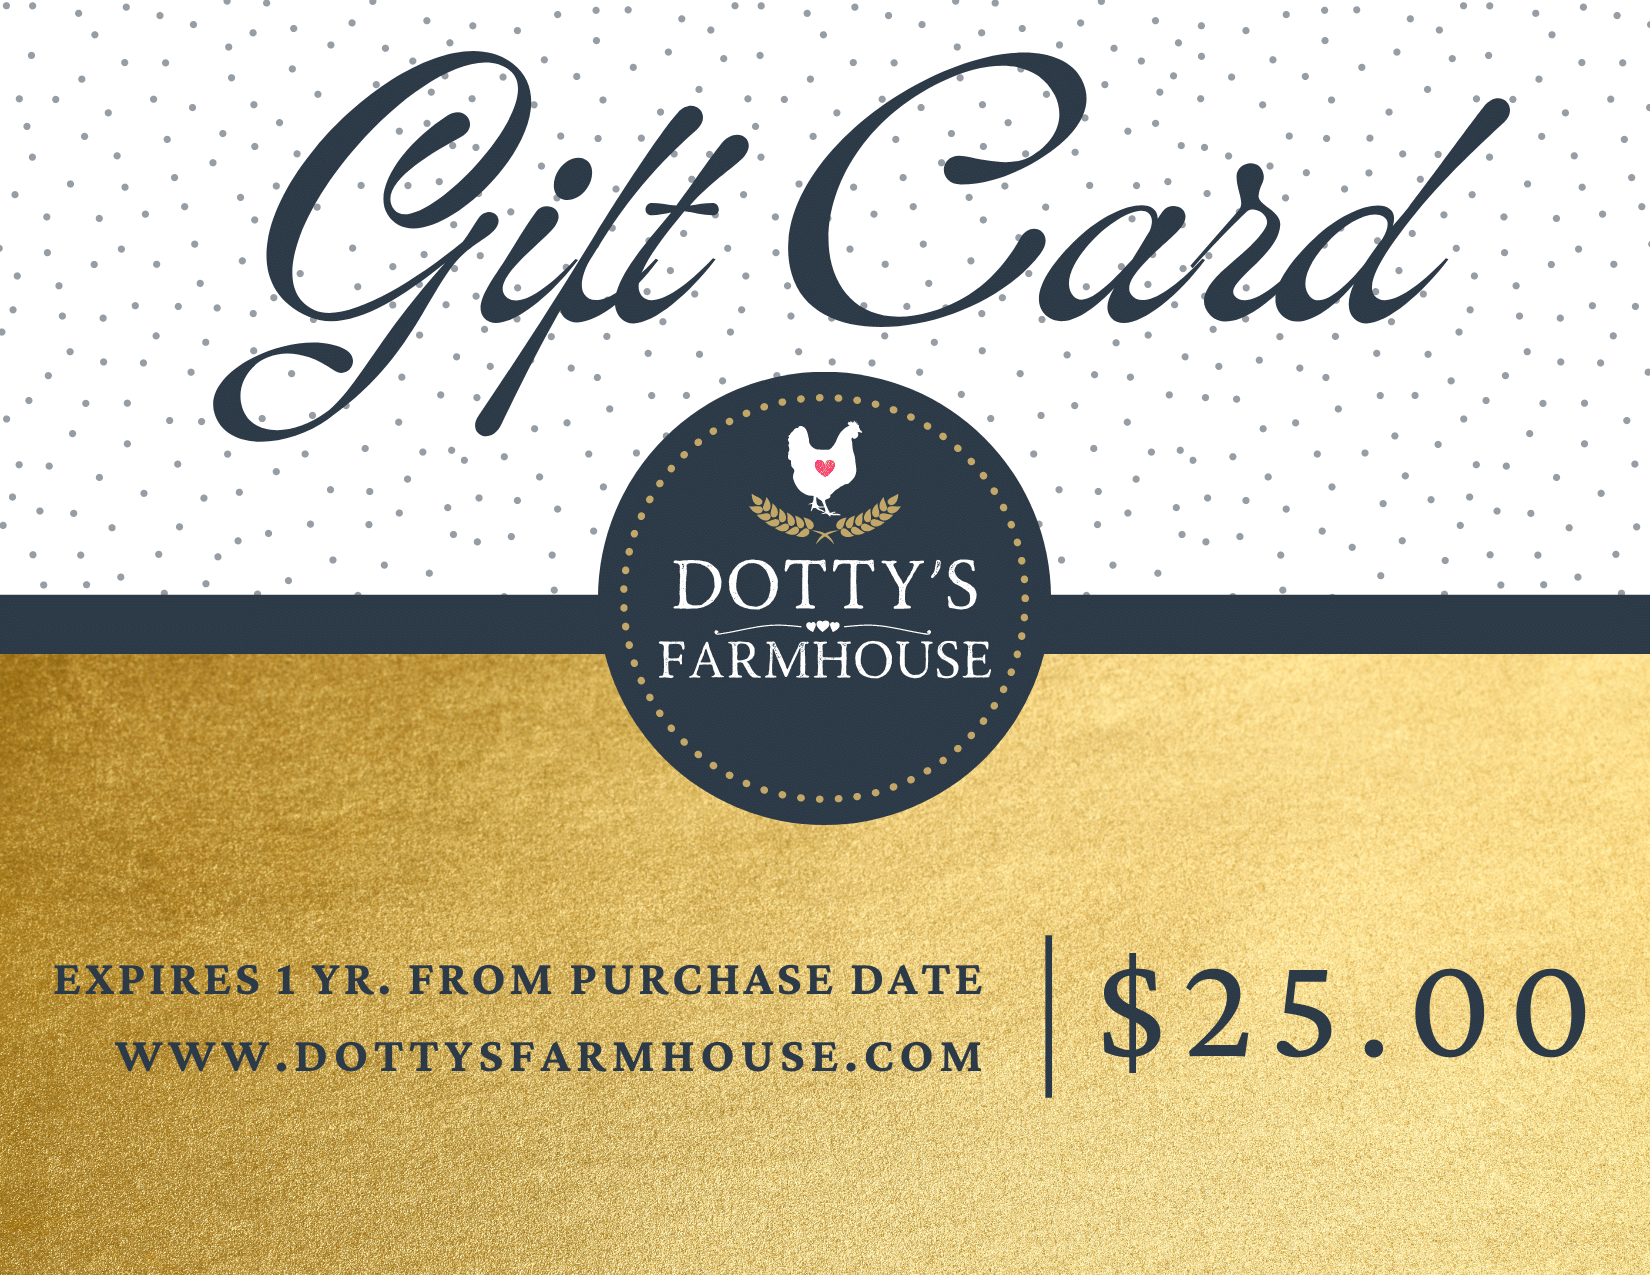 Gift Cards $25.00 / Email Gift Card Dotty's Farmhouse Gift Card